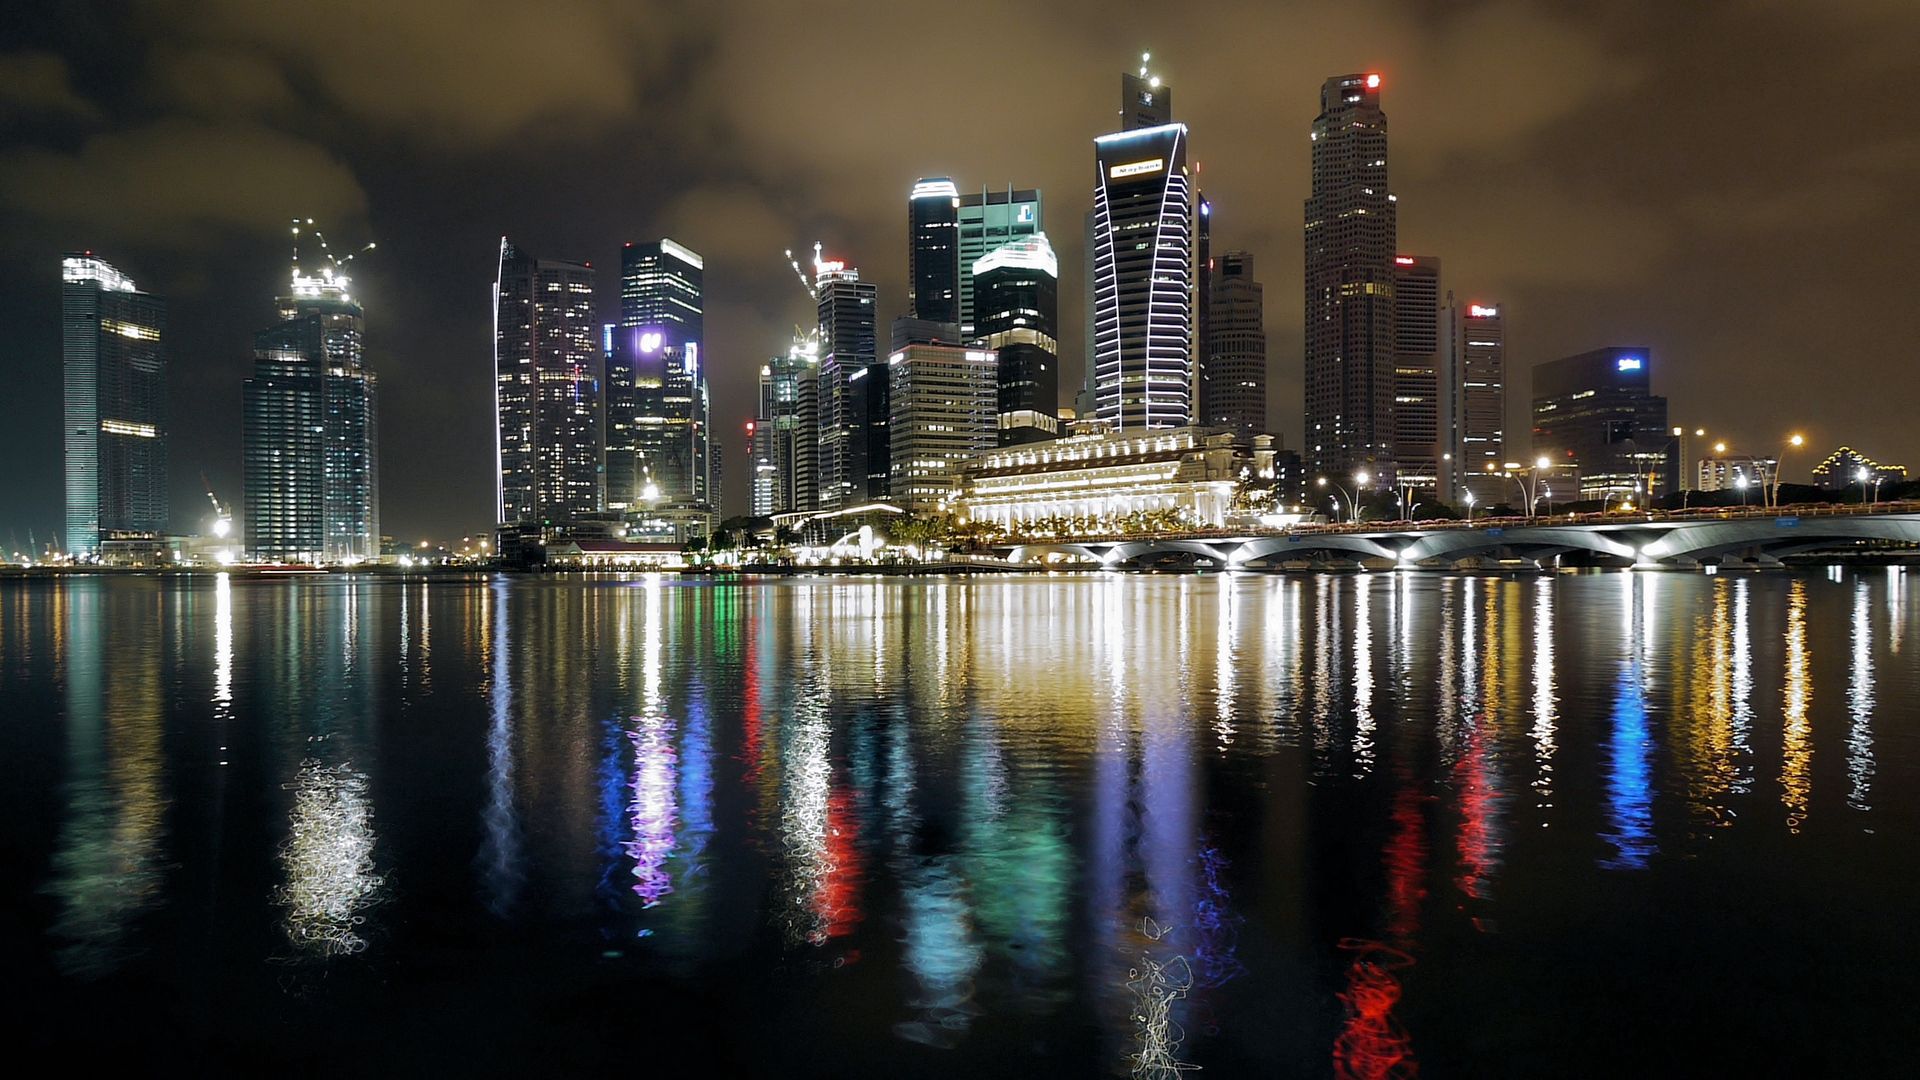 reflection, colorful, cities, night, building, colourful, singapore cellphone